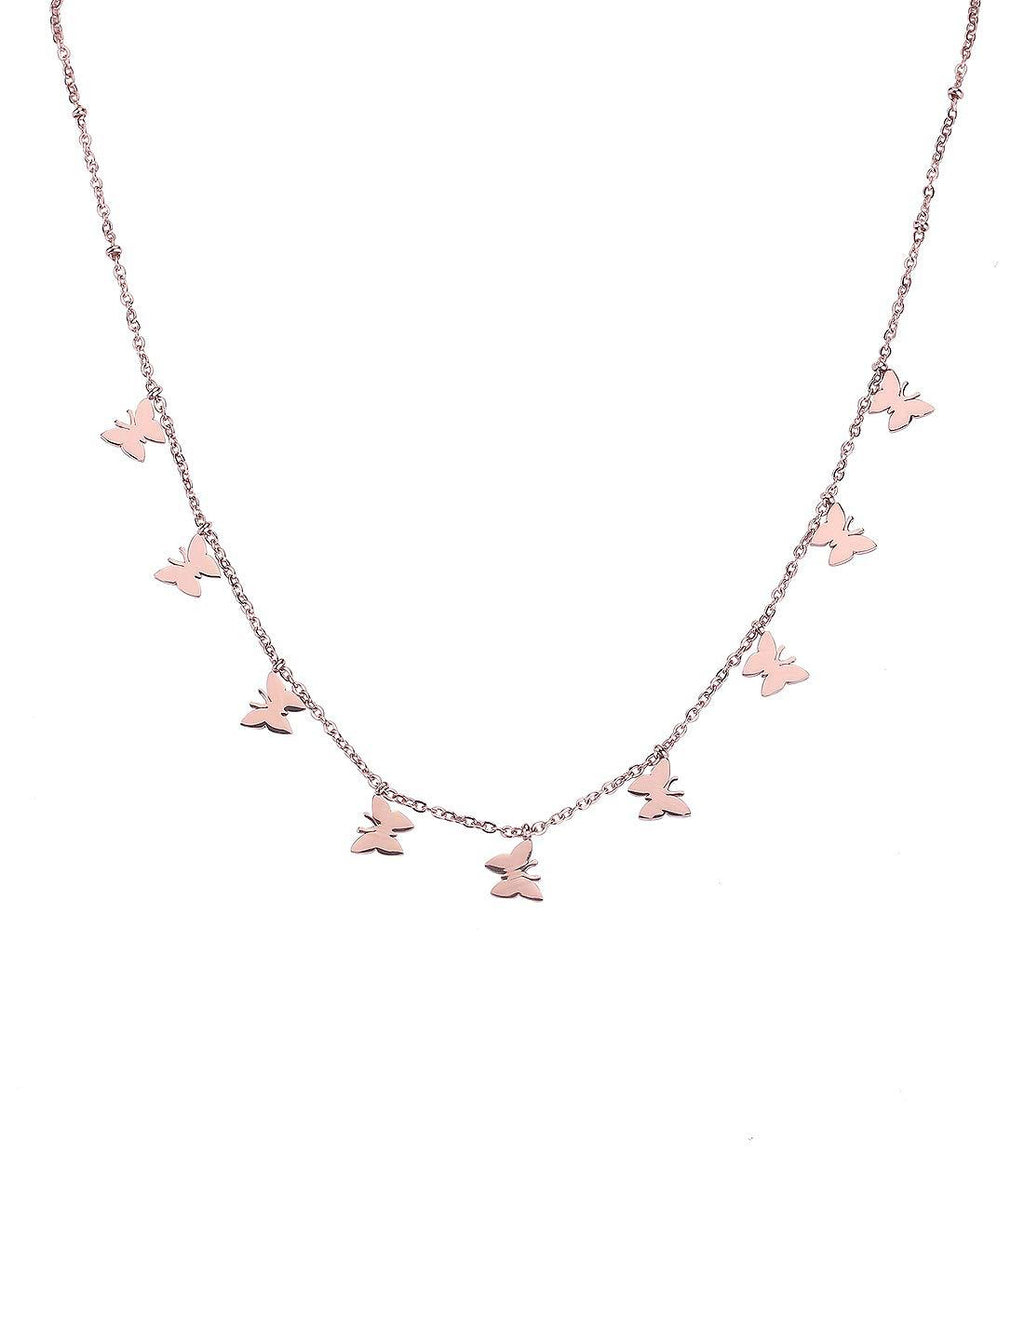 [Australia] - Rose Gold Butterfly Necklace - Butterfly Choker Necklace Plated in 18k Gold Perfect for Women,Girls - Dainty Charm Silver Stainless Steel Chain Butterfly Pendant Necklace Rosegold-butterfly choker 